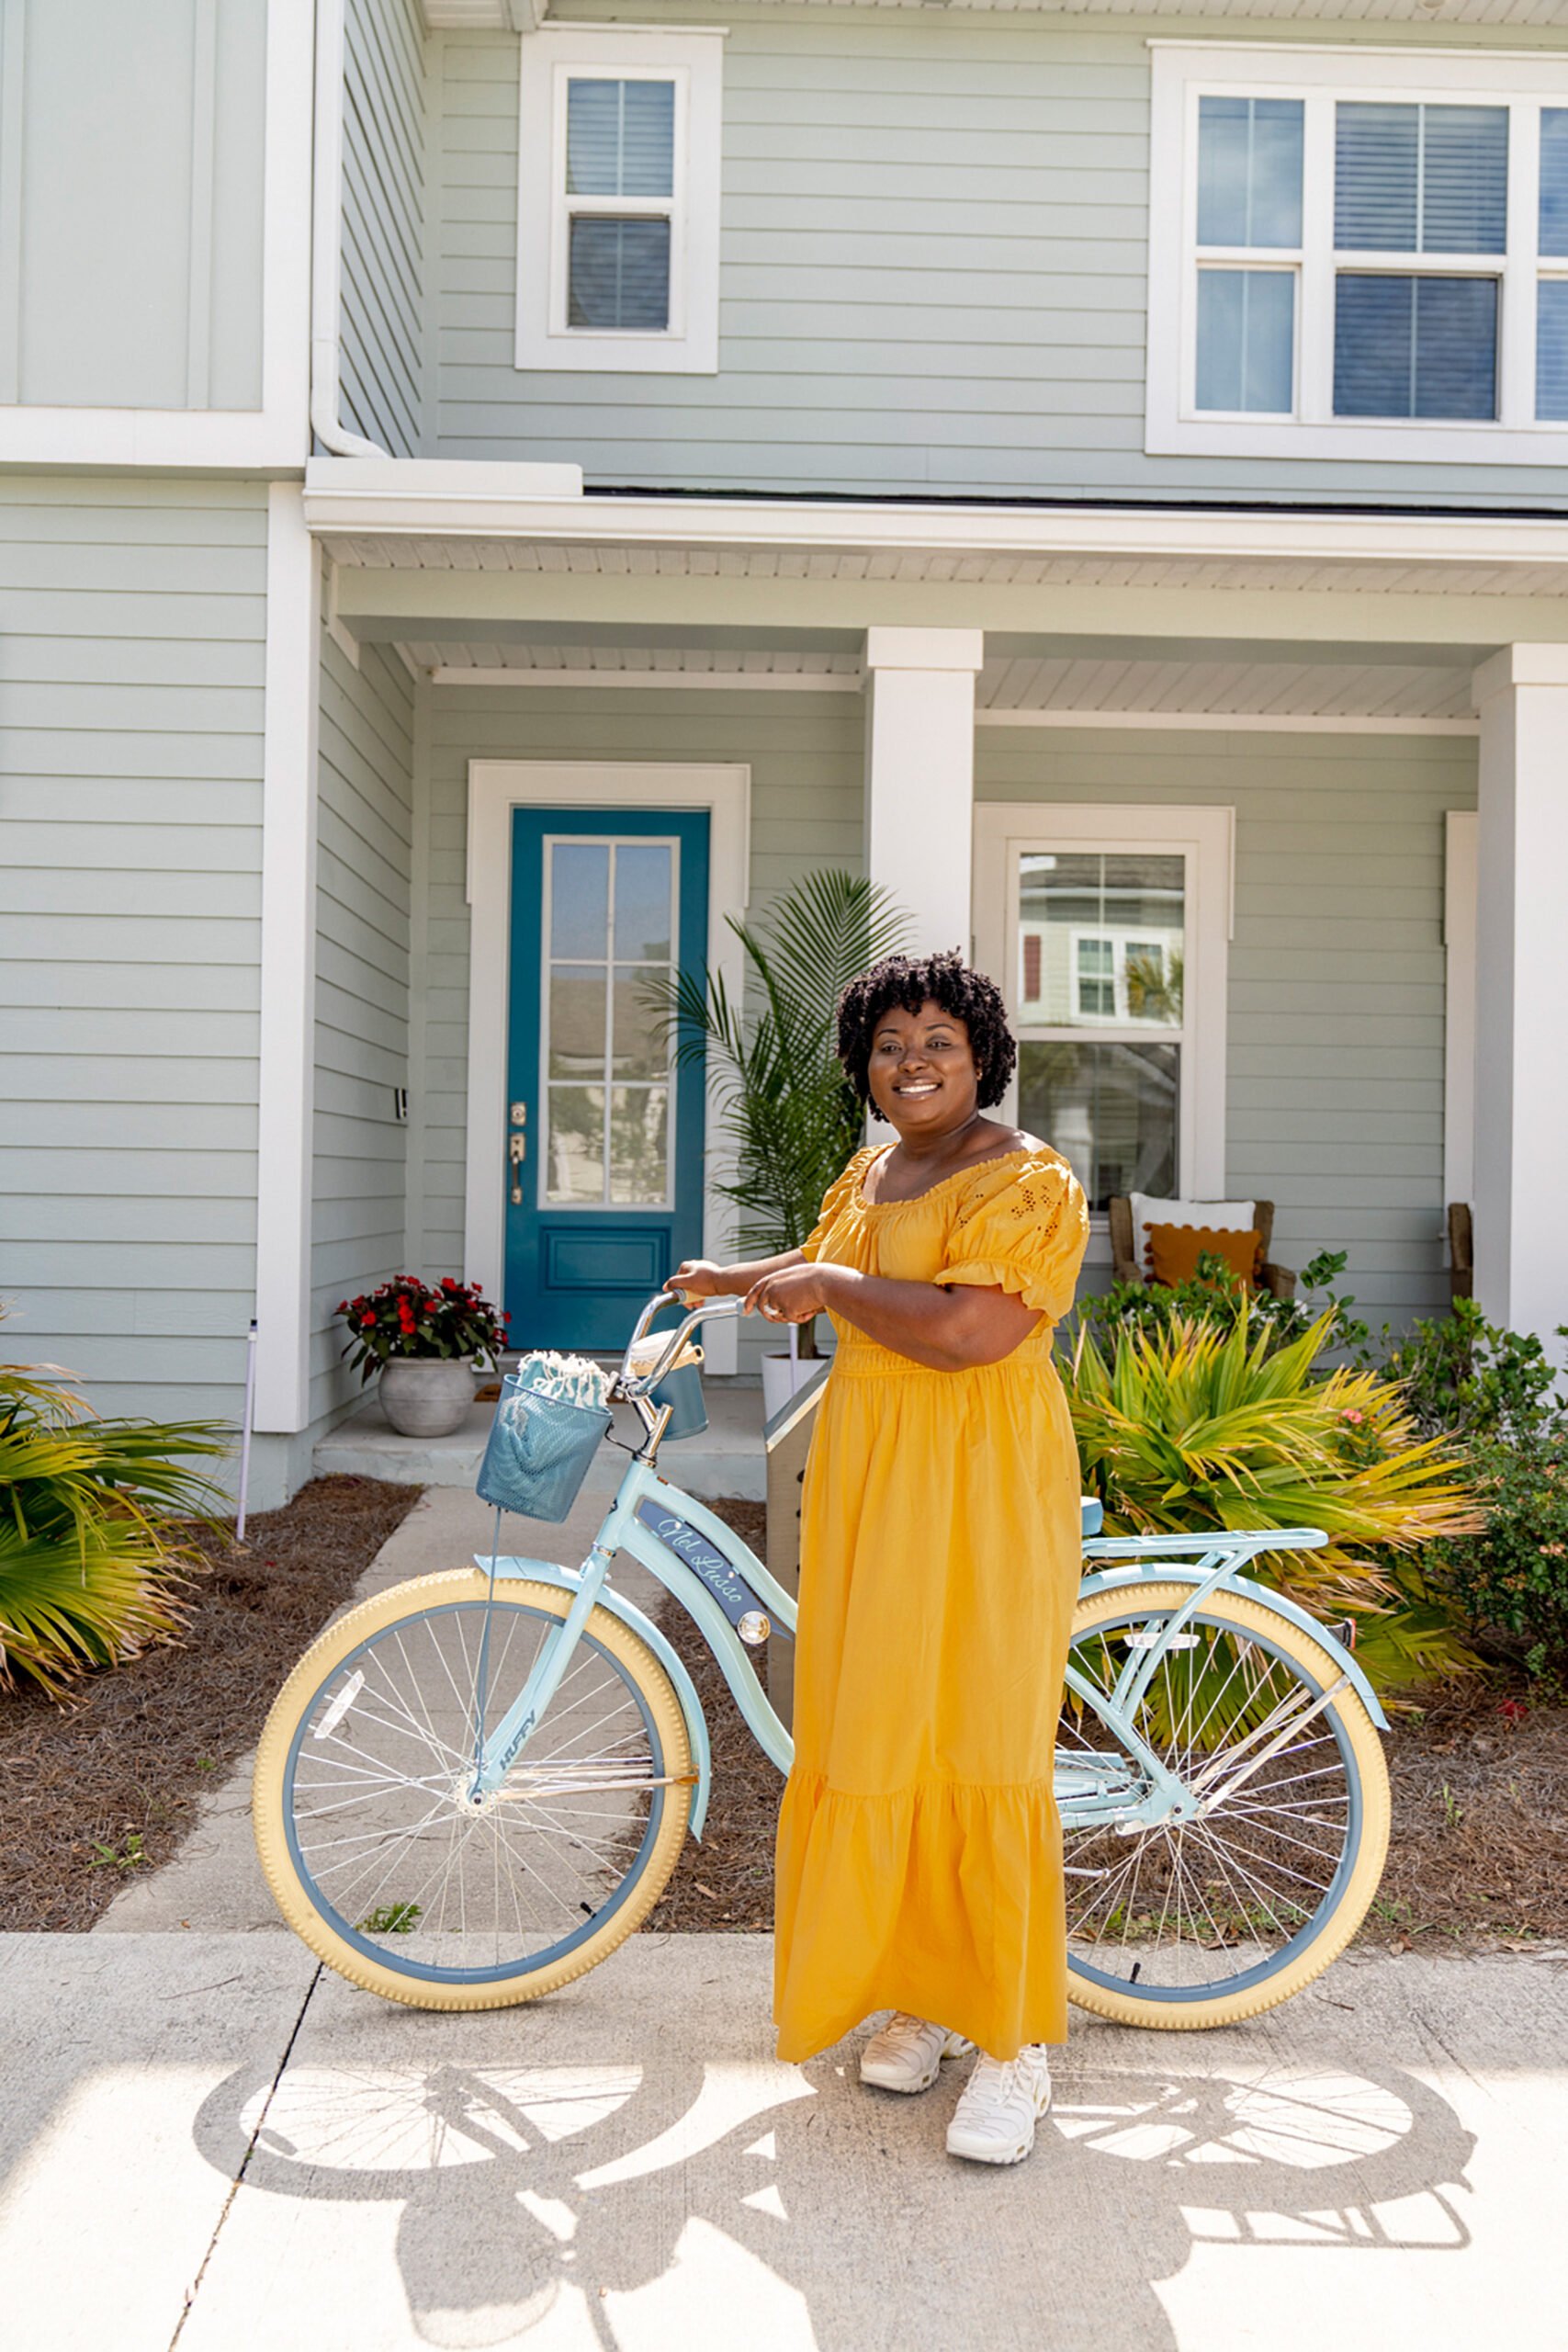 A woman in a yellow dress standing next to a blue bicycle in front of a house.